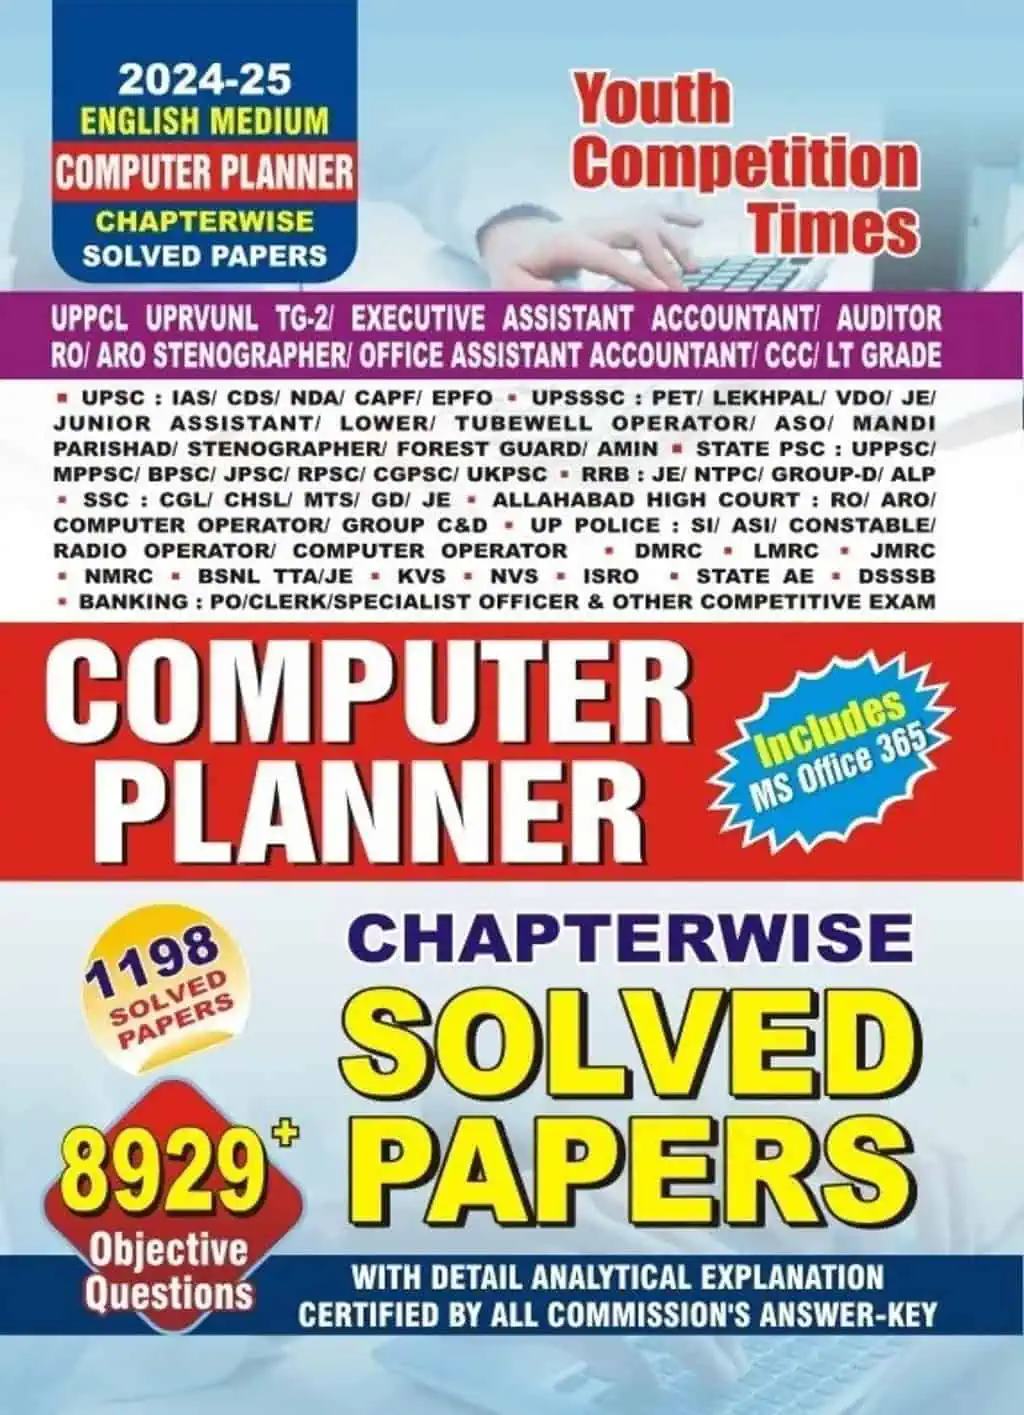 YCT Computer Planner Solved Papers PDF [English Medium]